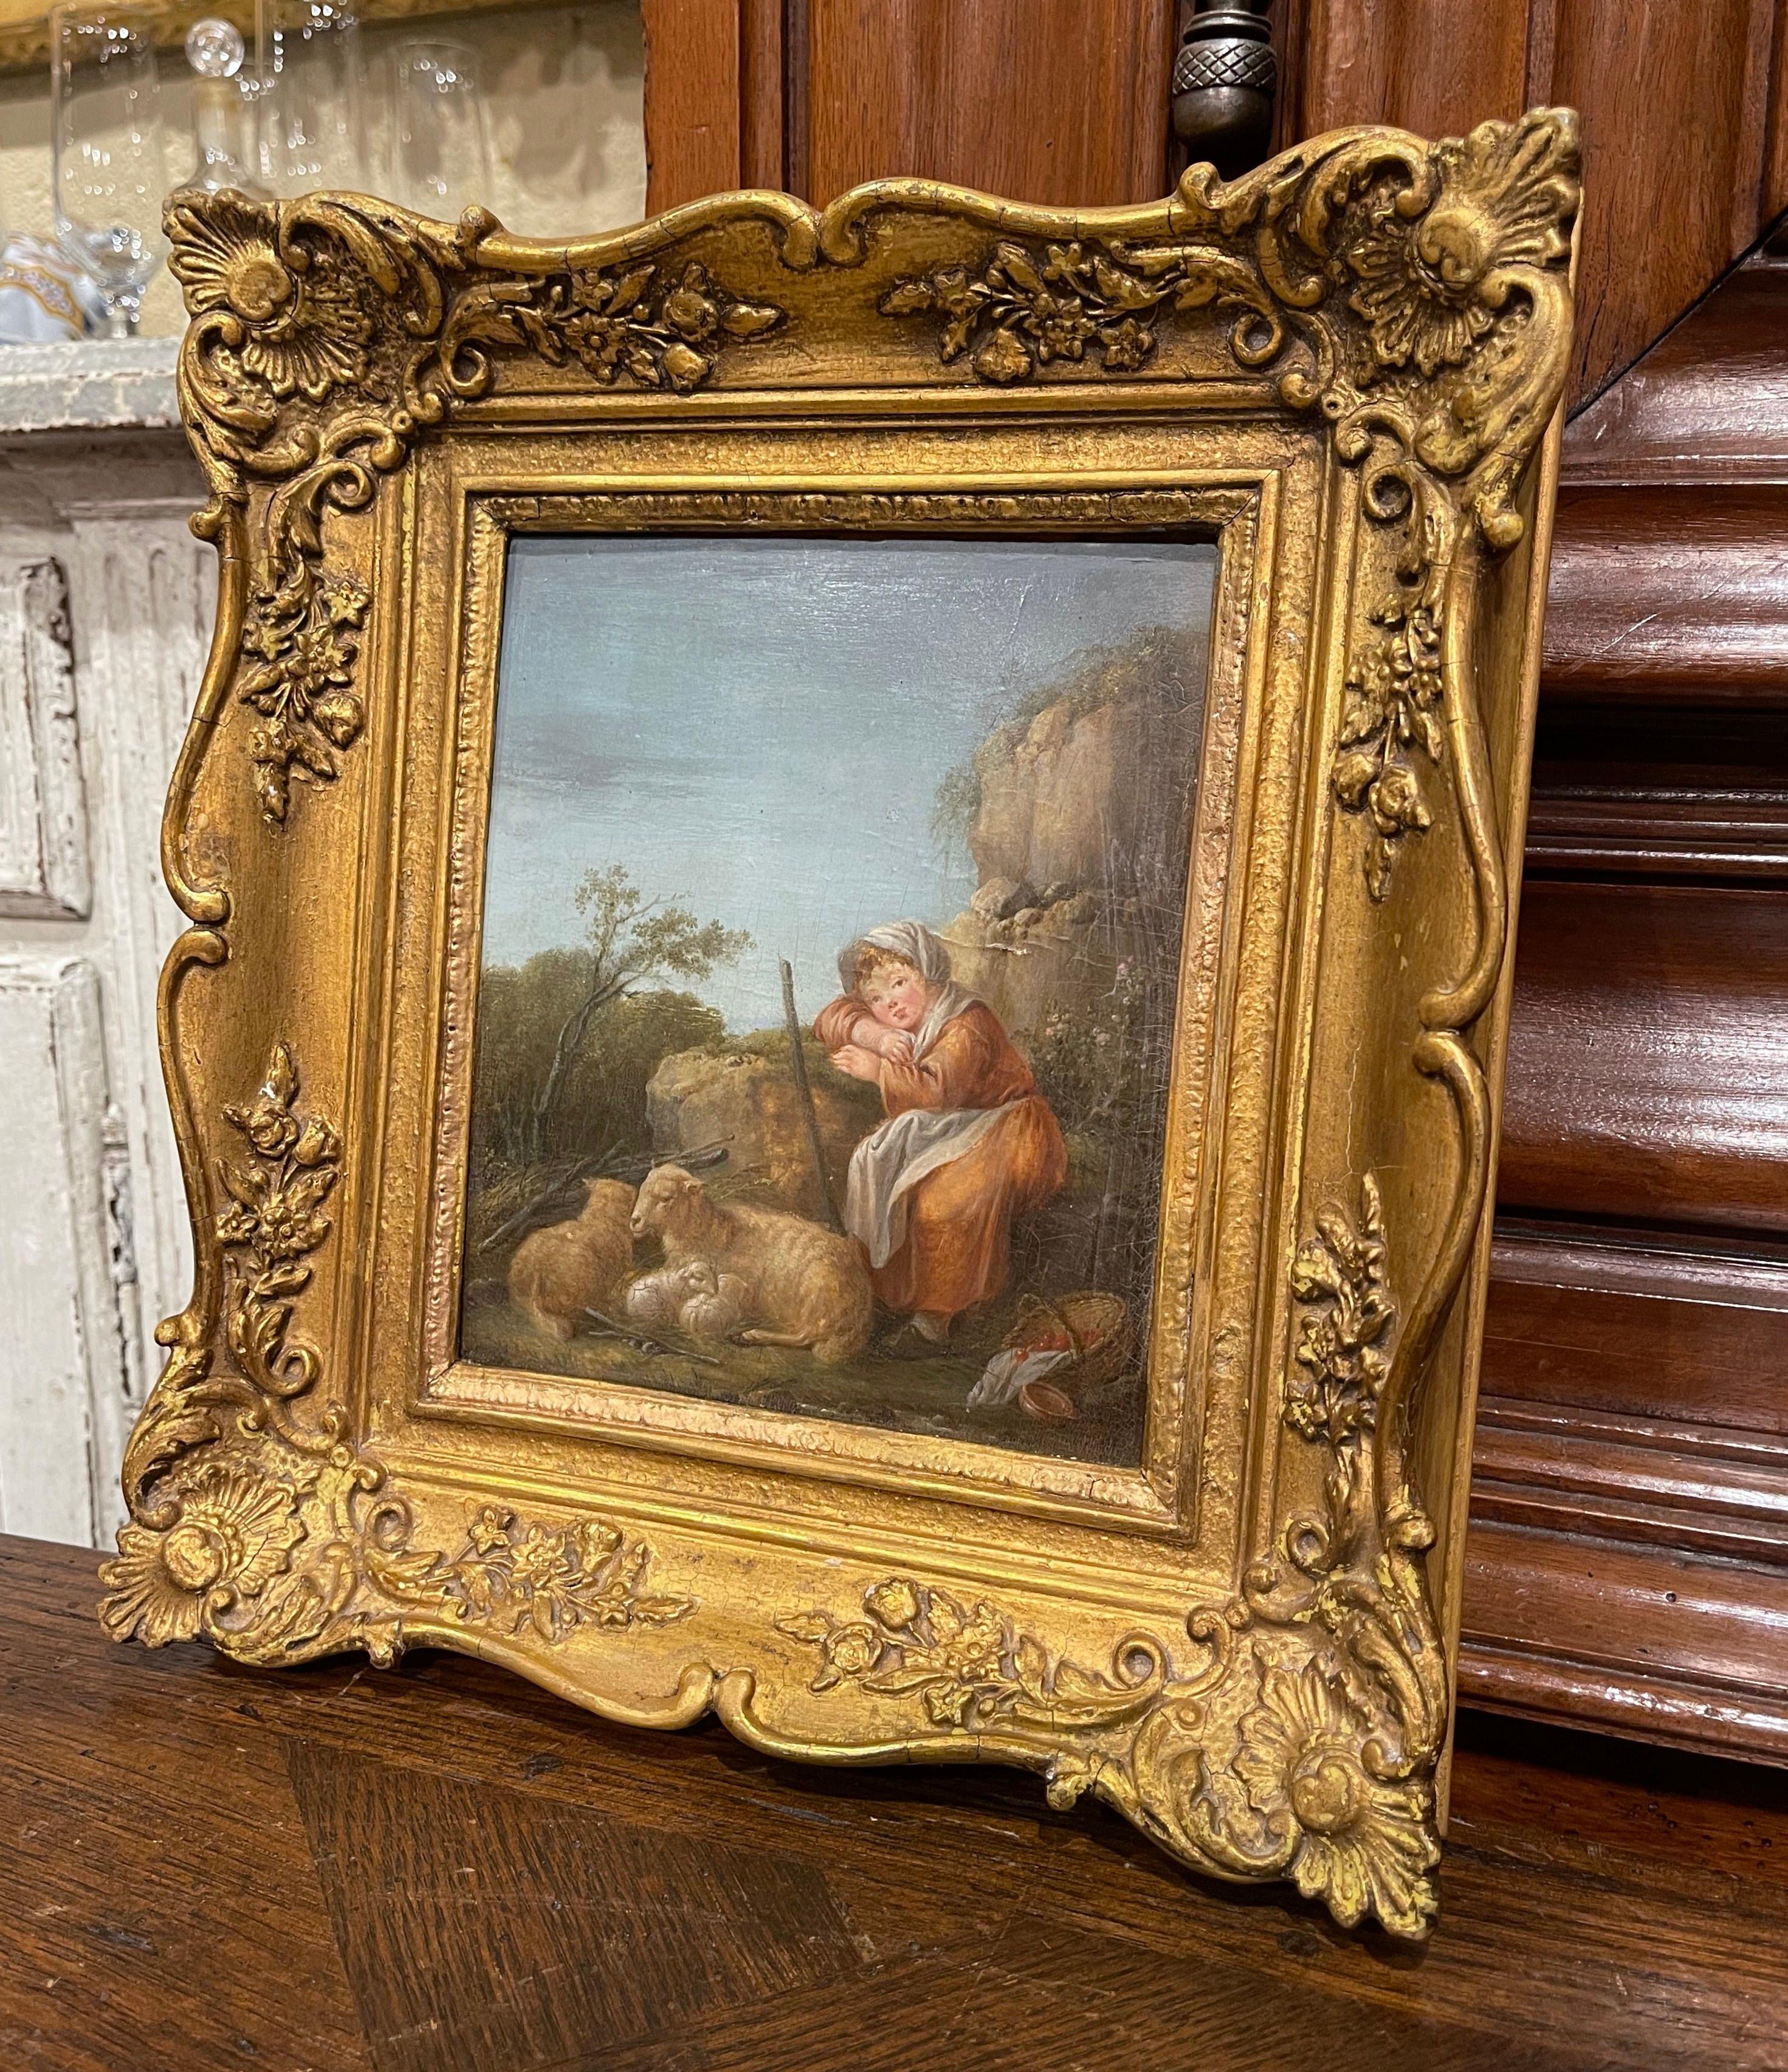 Created in England and attributed to Francis Wheatley (1747-1801), the oil on panel depicts a young shepherdess attending her sheep and lambs in a pastoral landscape. The colorful art work is dressed in the original carved gilt wood frame. It is